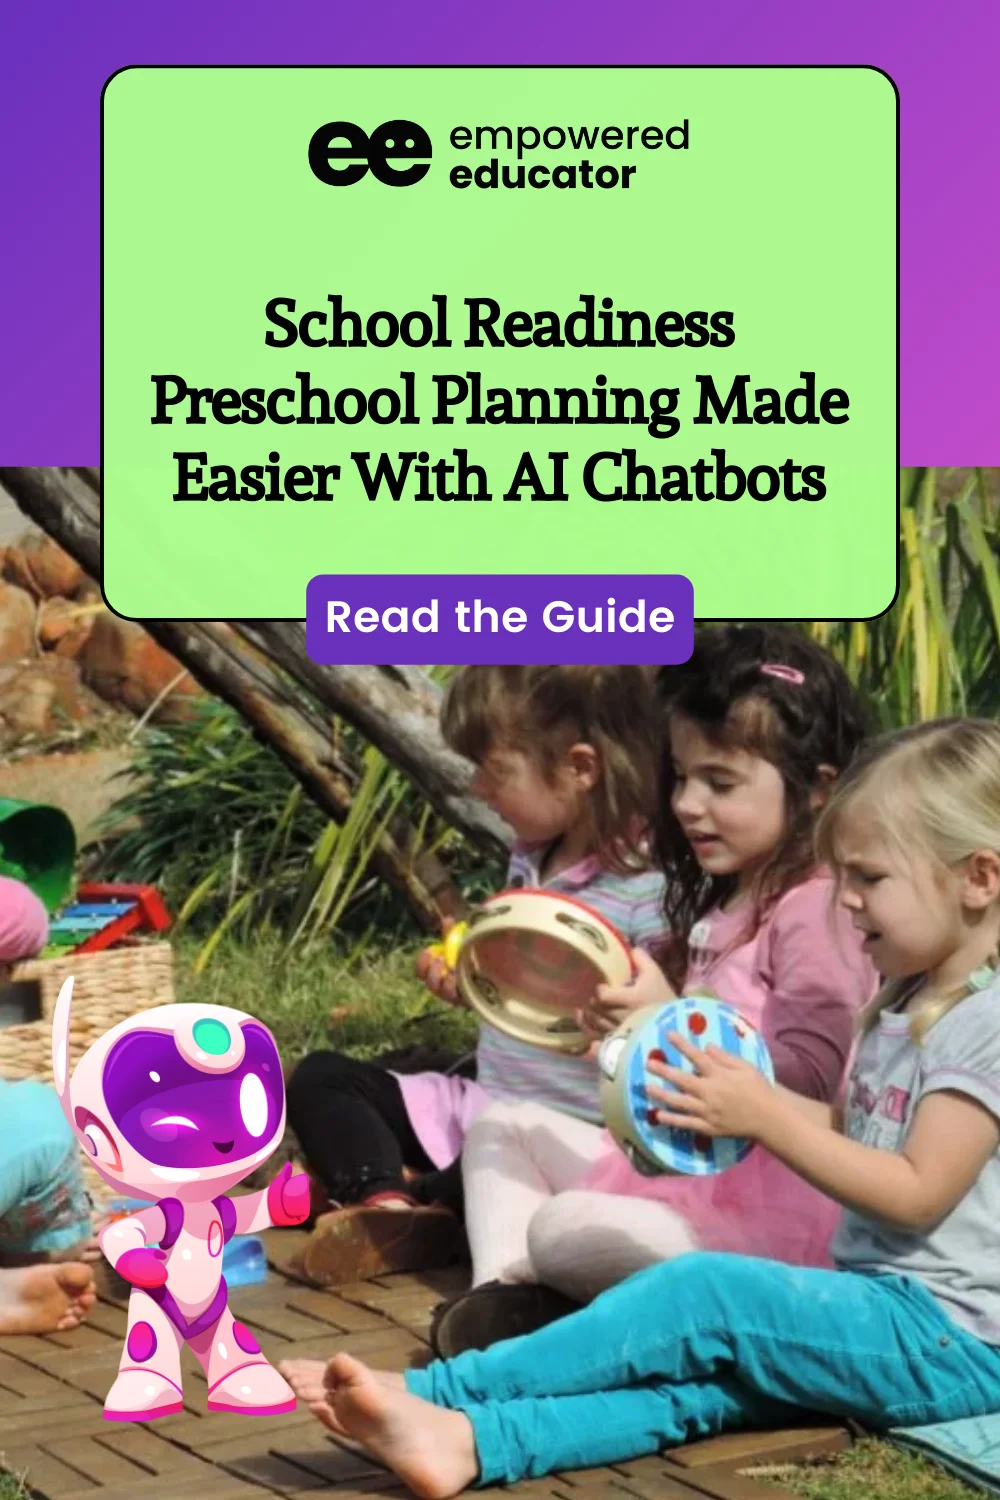 School Readiness Preschool Planning Made Easier With AI Chatbots